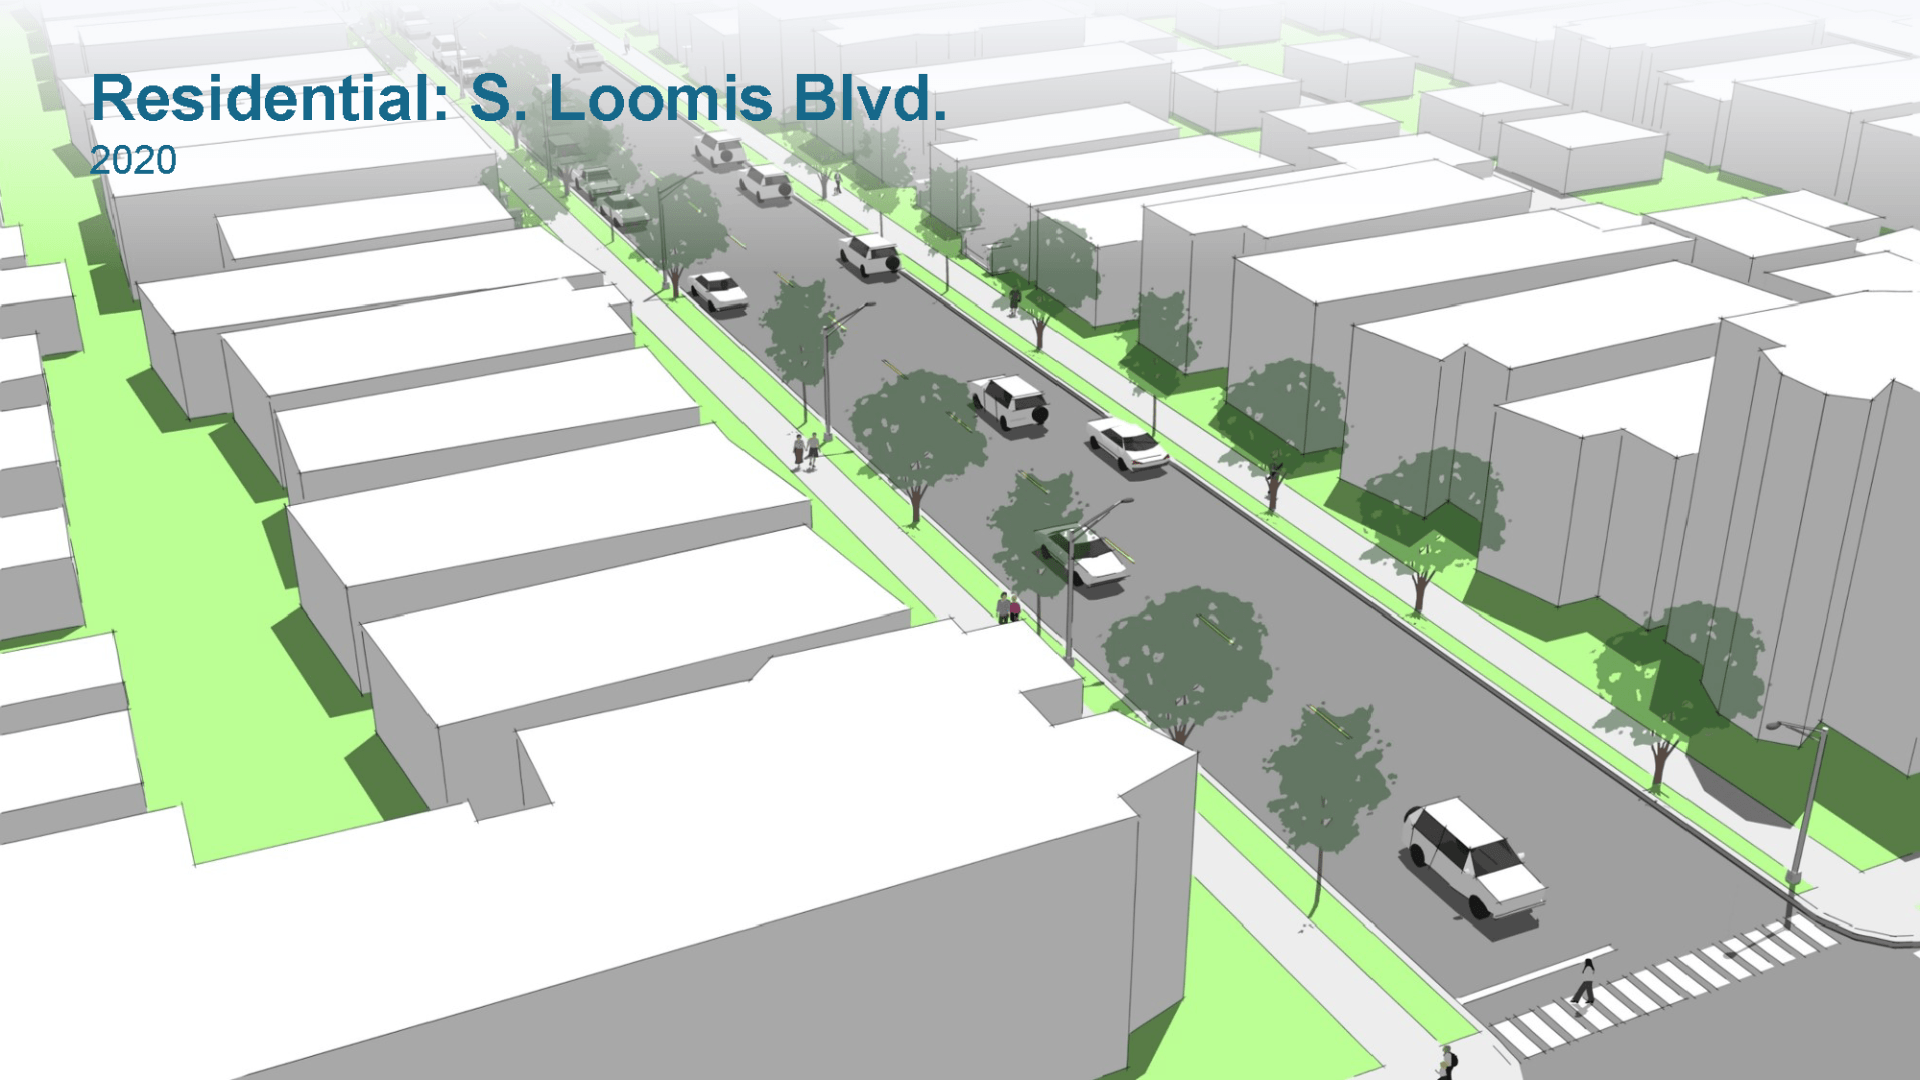 Illustration of South Loomis Boulevard in 2020